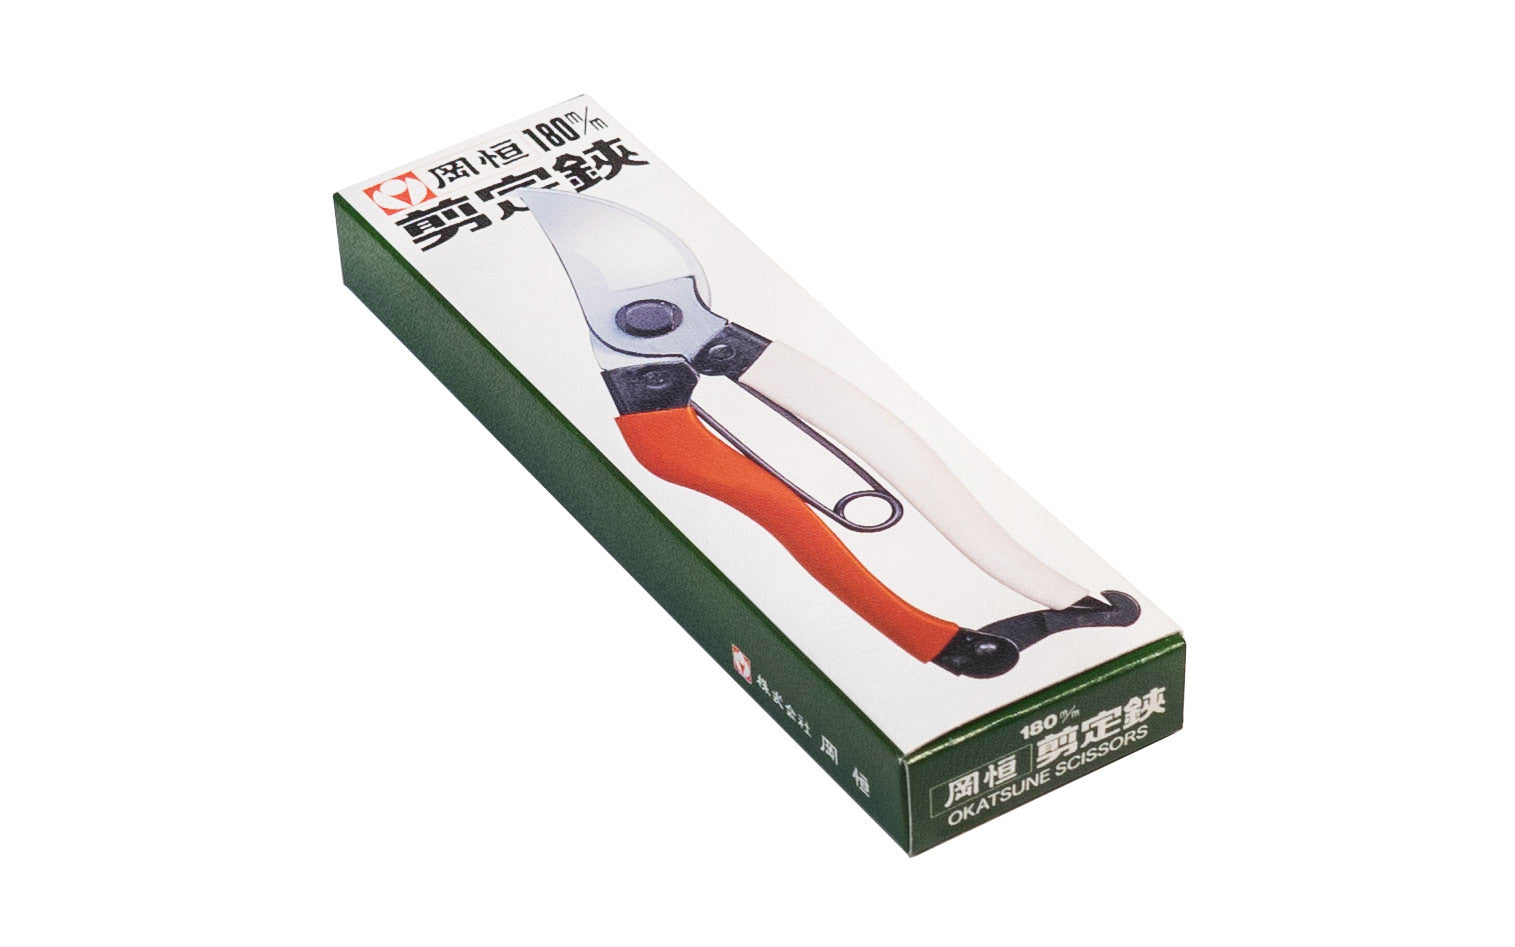 The Japanese Okatsune No. 101 bypass small pruners are excellent high quality elegant pruners. 7" long, small size model 180 mm. Quality Japanese Izumo Yasuki steel. 3/4" cutting diameter max (live). For various garden tasks such as trimming, pruning, thinning, & general purpose cutting. Made in Japan. 4968779101006